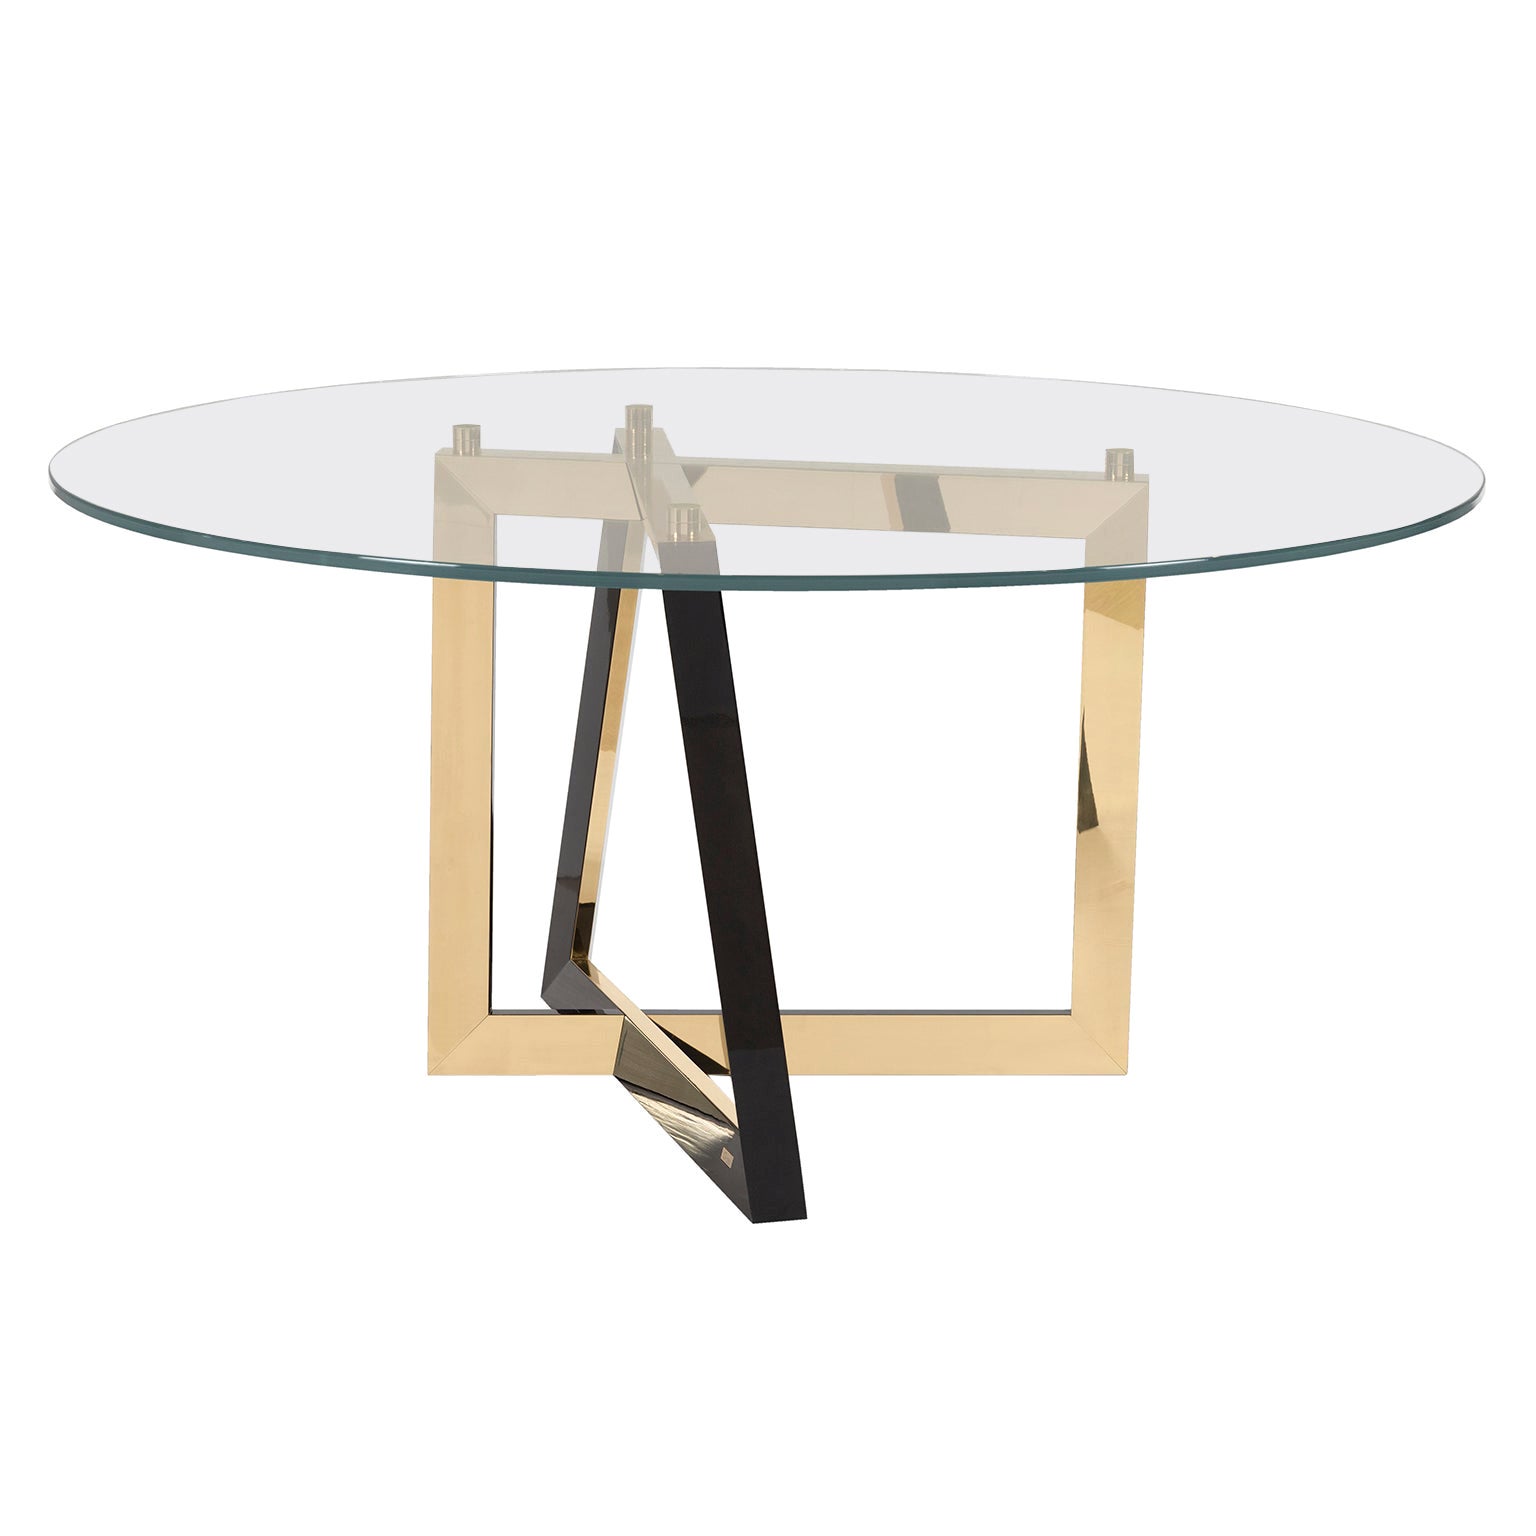 Greenapple Dining Table, Olisippo Dining Table 6-Seat, Handmade in Portugal